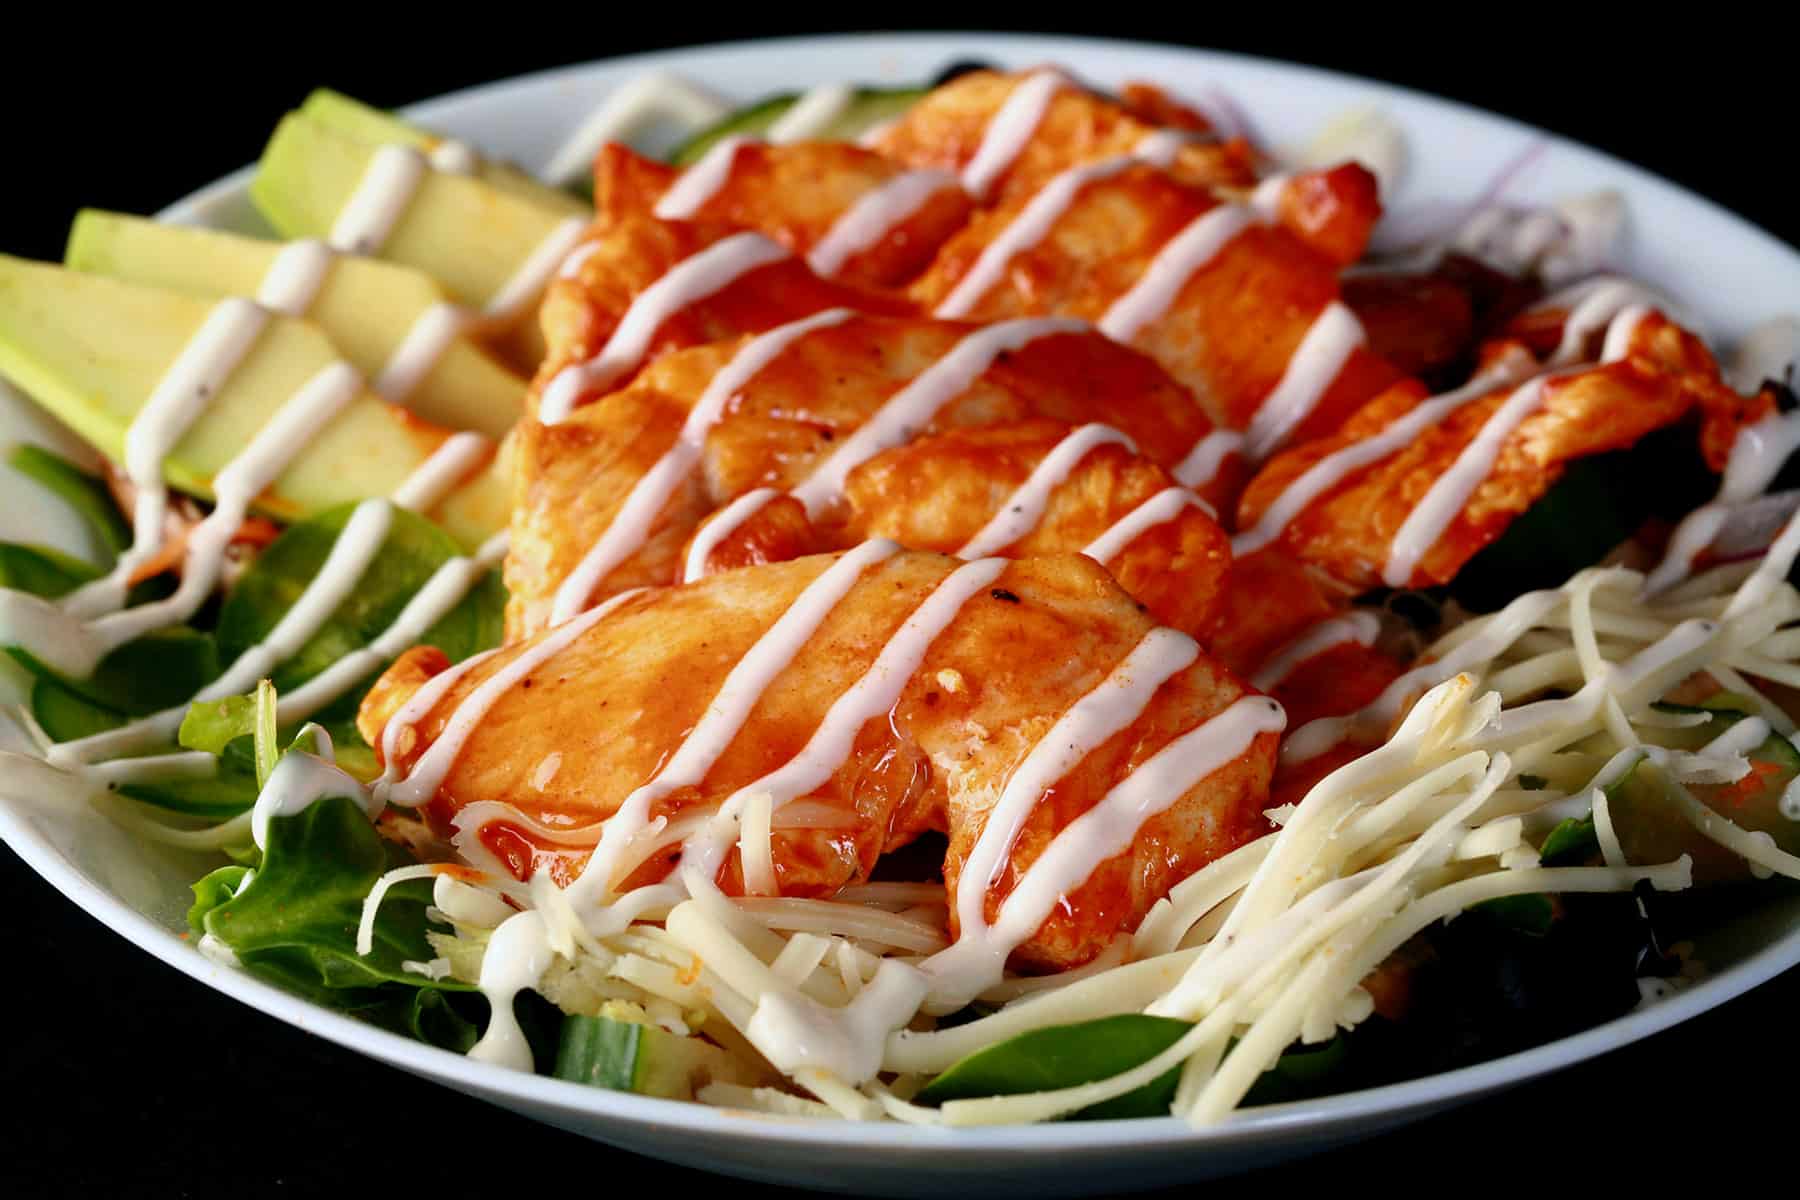 A buffalo chicken salad drizzled with ranch dressing.